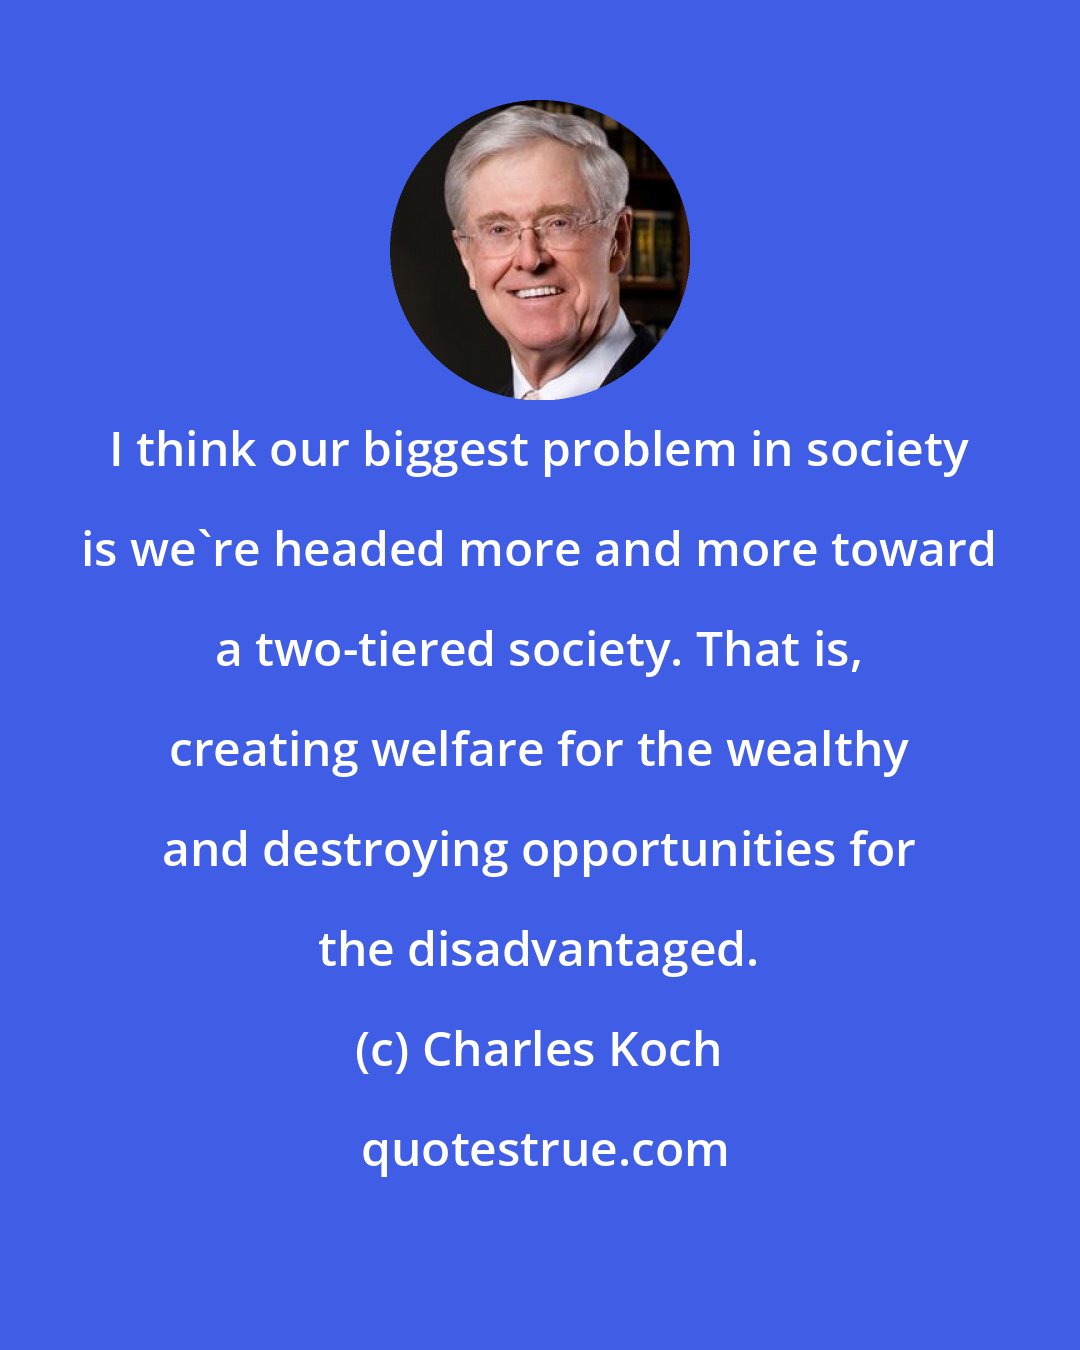 Charles Koch: I think our biggest problem in society is we're headed more and more toward a two-tiered society. That is, creating welfare for the wealthy and destroying opportunities for the disadvantaged.